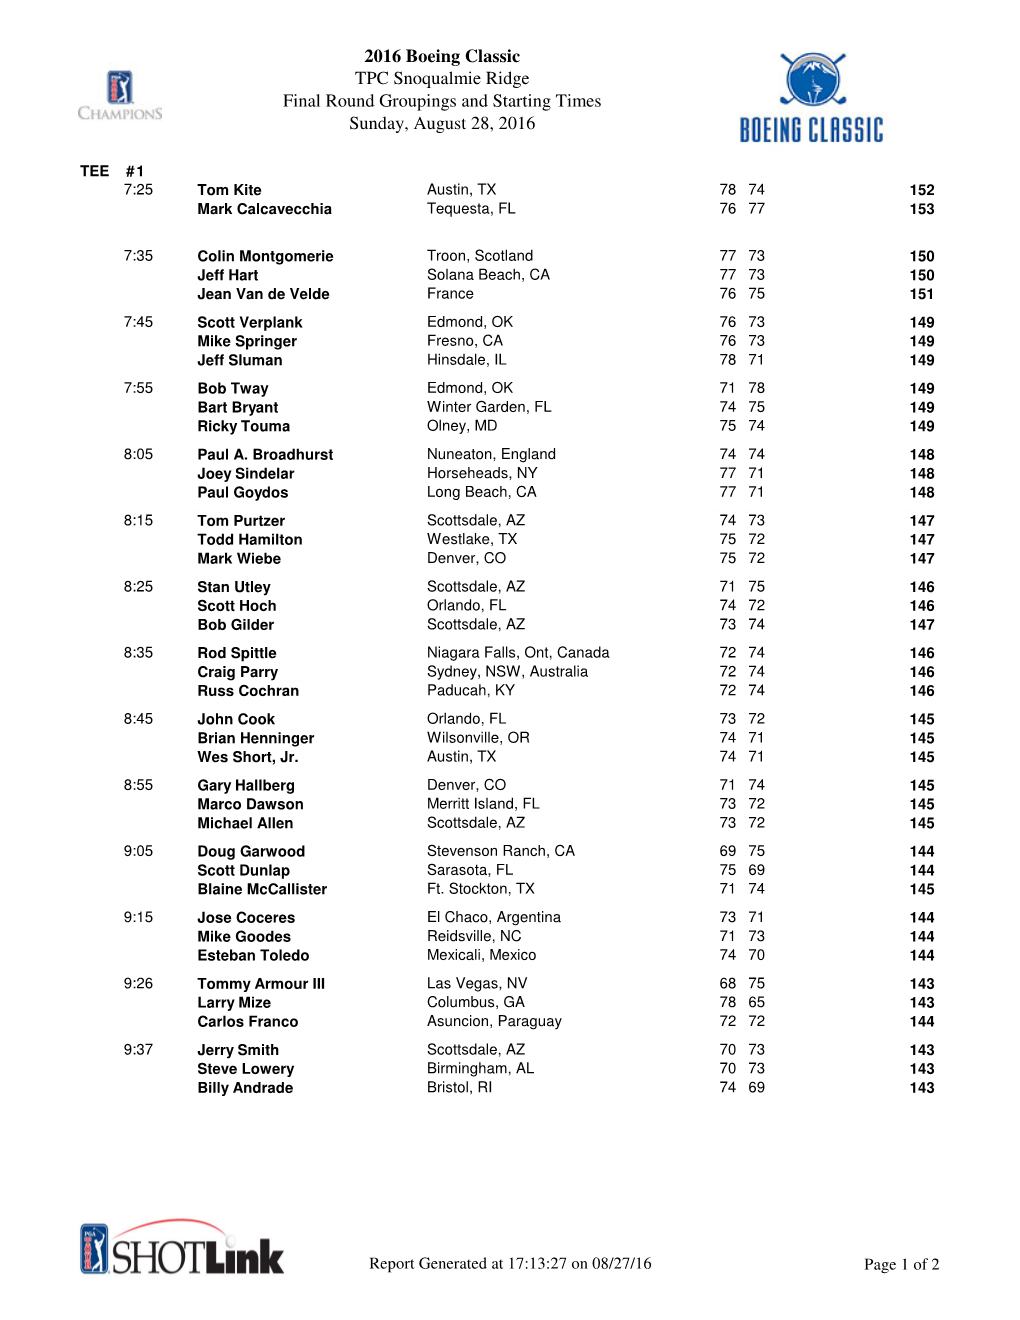 2016 Boeing Classic TPC Snoqualmie Ridge Final Round Groupings and Starting Times Sunday, August 28, 2016